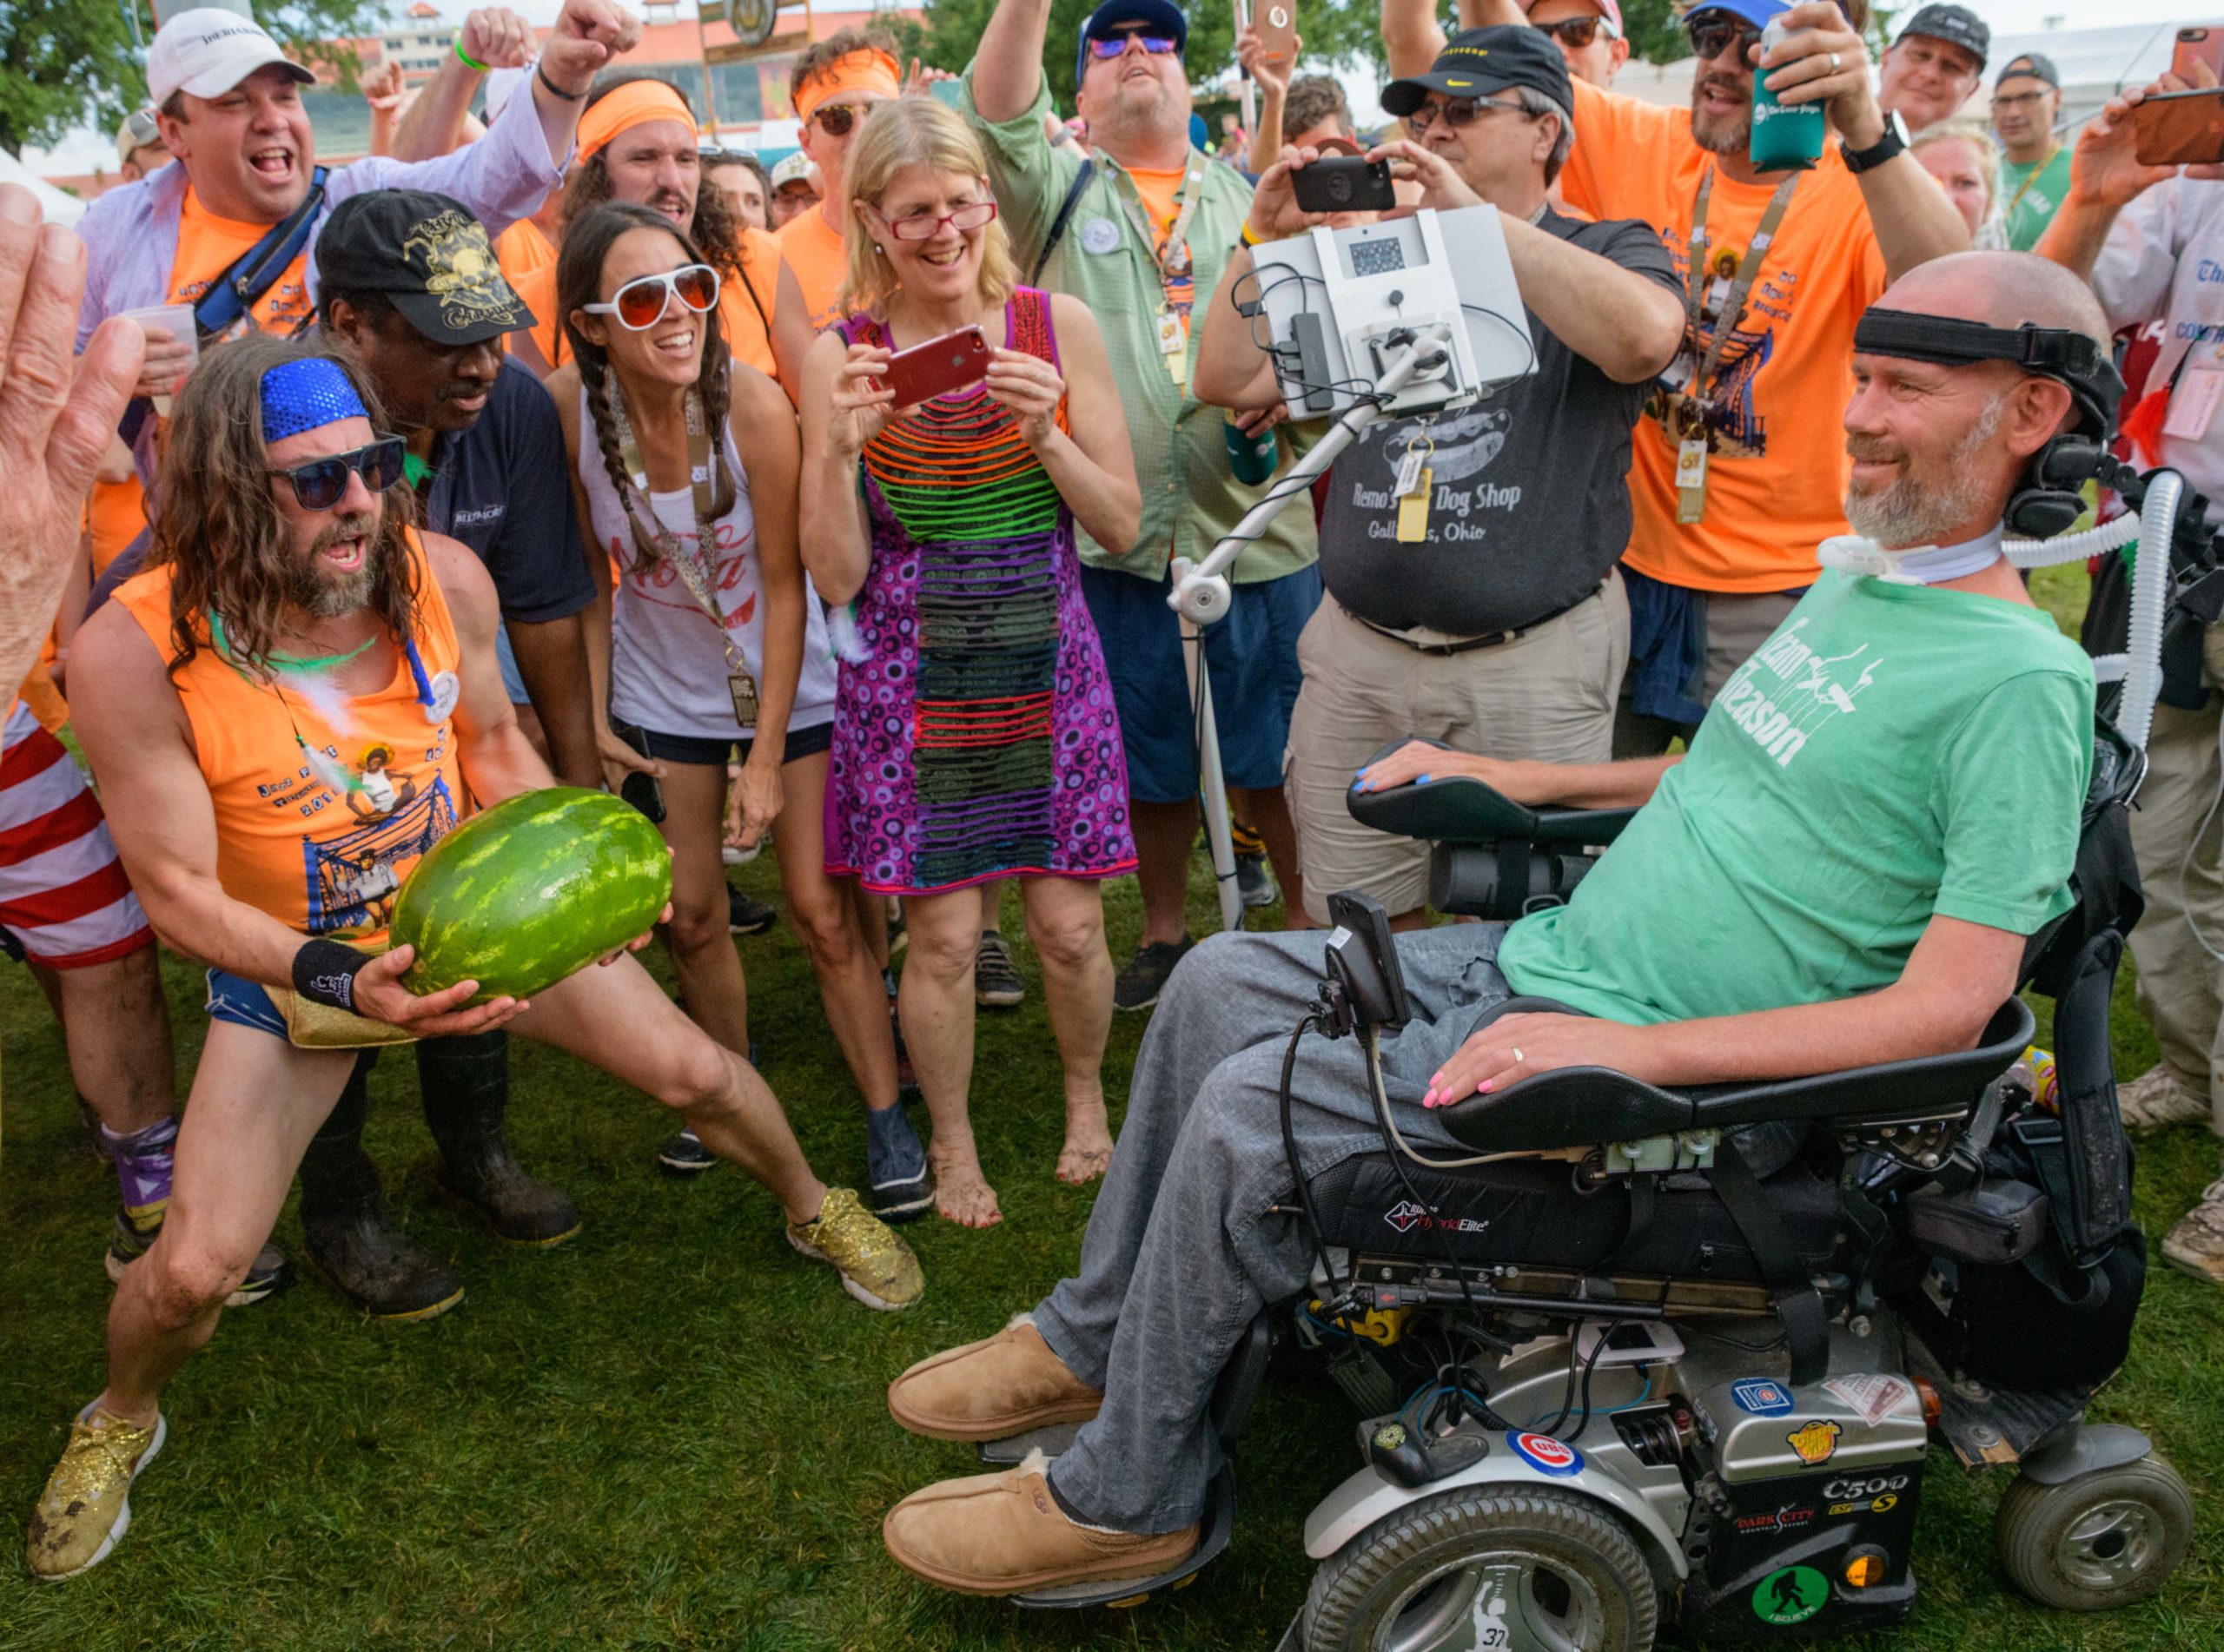 The members of the Cabrini Dad's Club, Tu-Tu Man, and Mick Jaggar (sic) present the 20th Jazz Fest Triathlon watermelon sacrifice to former New Orleans Saints legend and ALS advocate Steve Gleason at the Fais Do Do Stage at Jazz Fest on Locals Thursday in New Orleans, La. Thursday, April 25, 2019. The annual triathlon begins in Bayou St. John with a bicycle race followed by the watermelon sacrifice, then a run, and swim again in Bayou St. John. Photo by Matthew Hinton